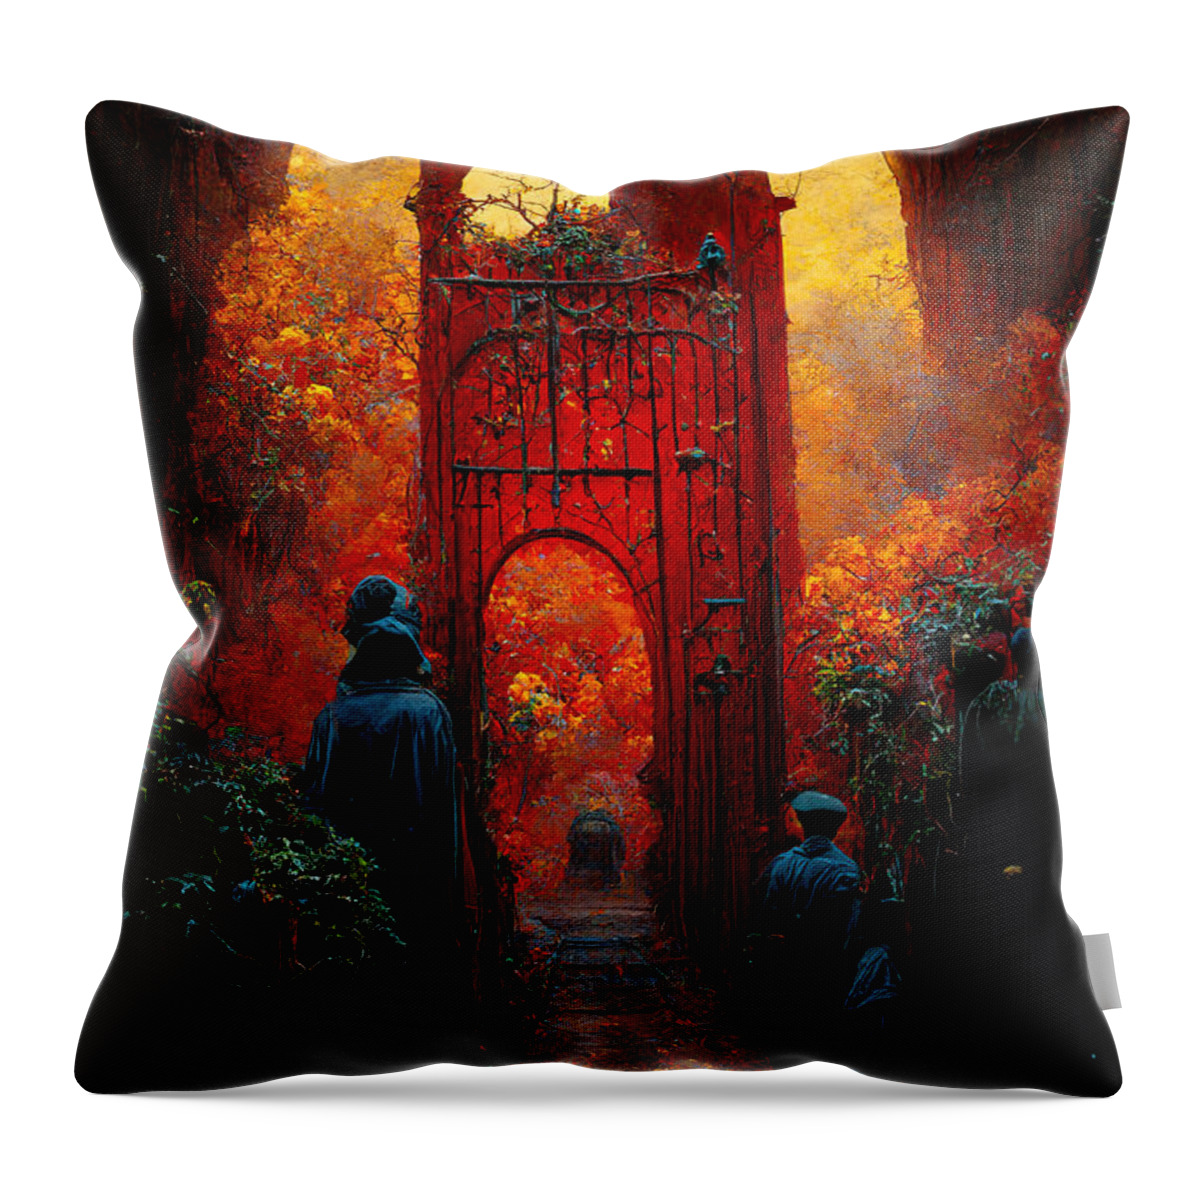 The Gates Of Karma Throw Pillow featuring the painting The Gates of KARMA - oryginal artwork by Vart. by Vart